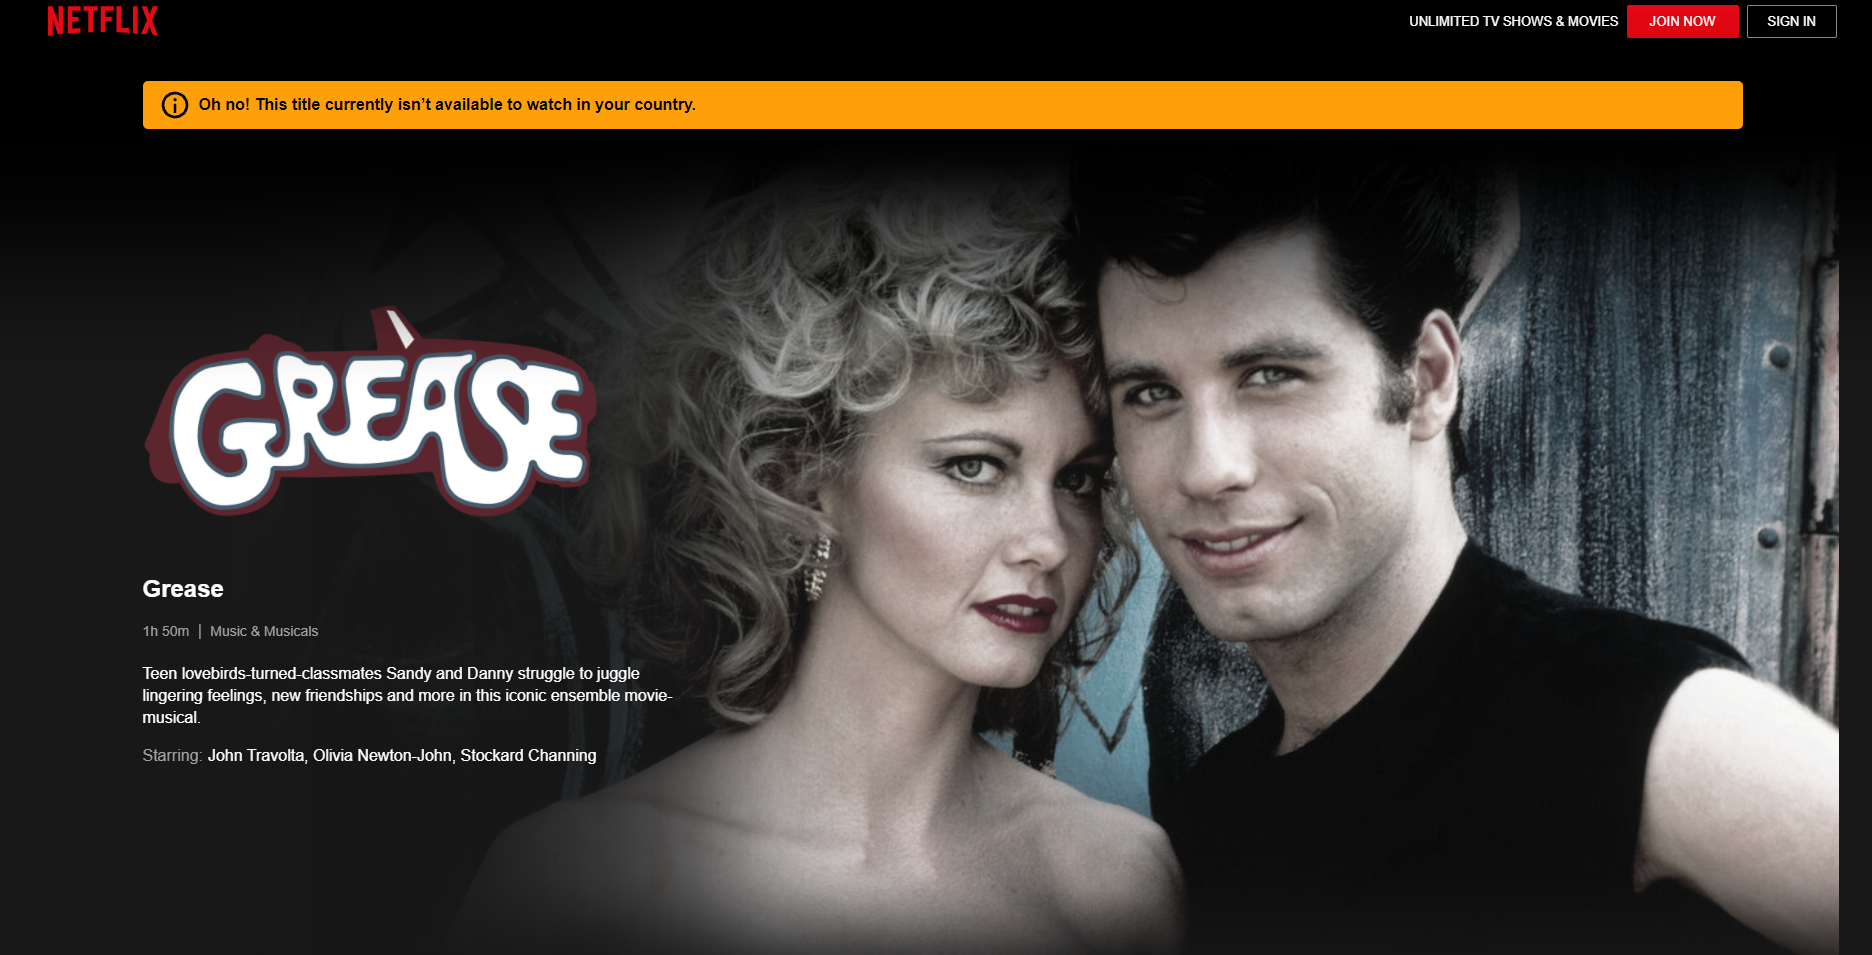 is grease on netflix